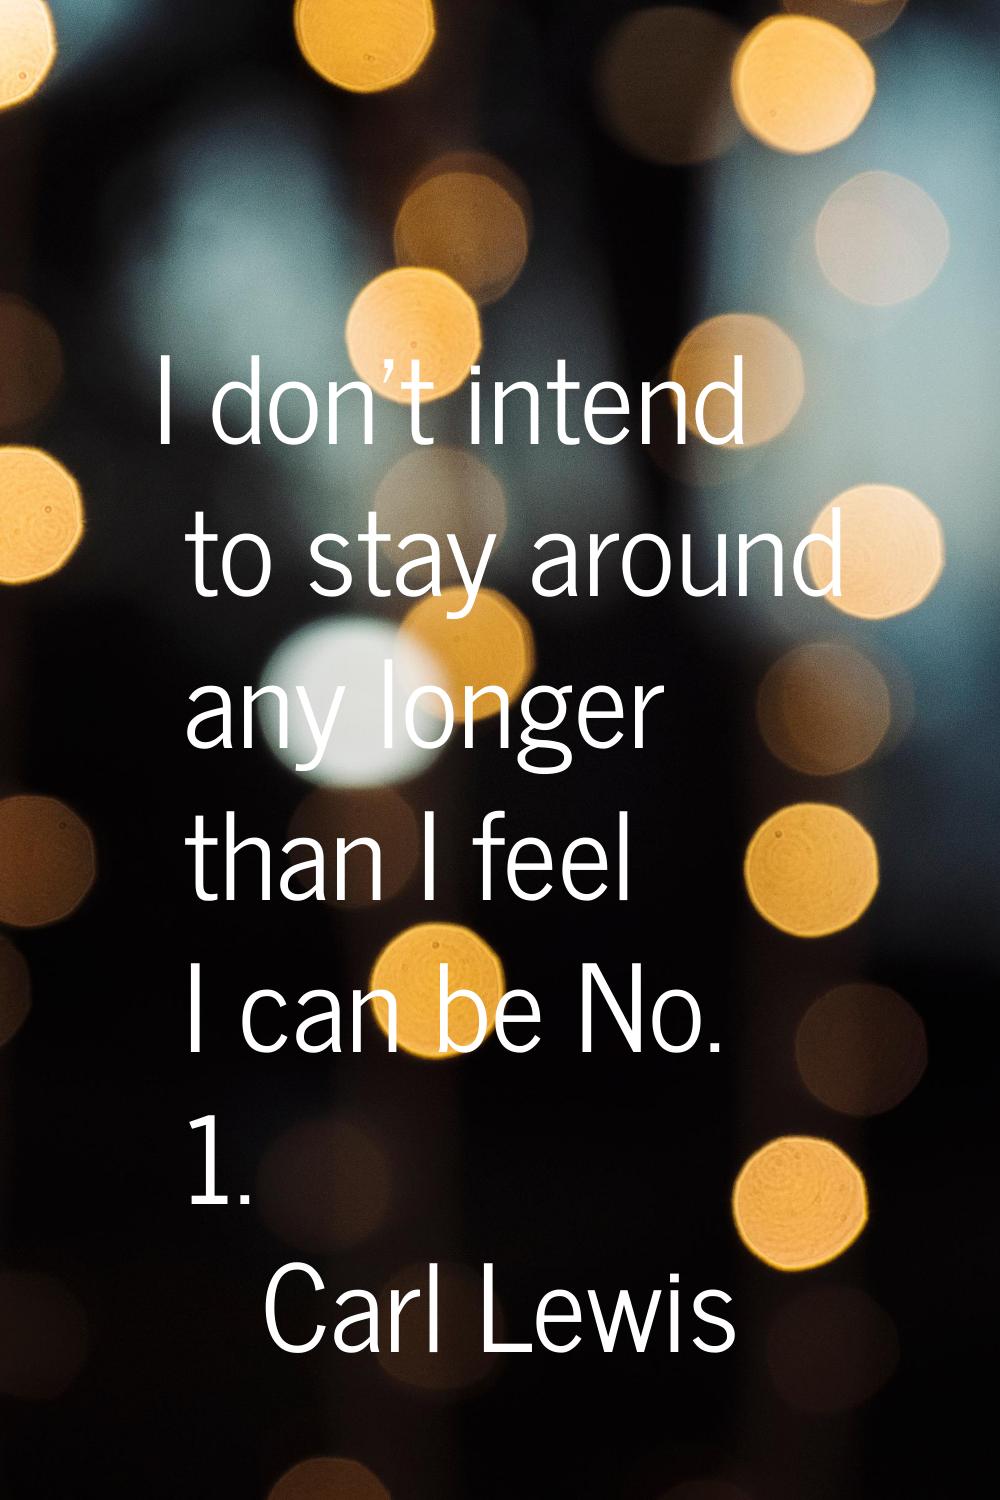 I don't intend to stay around any longer than I feel I can be No. 1.